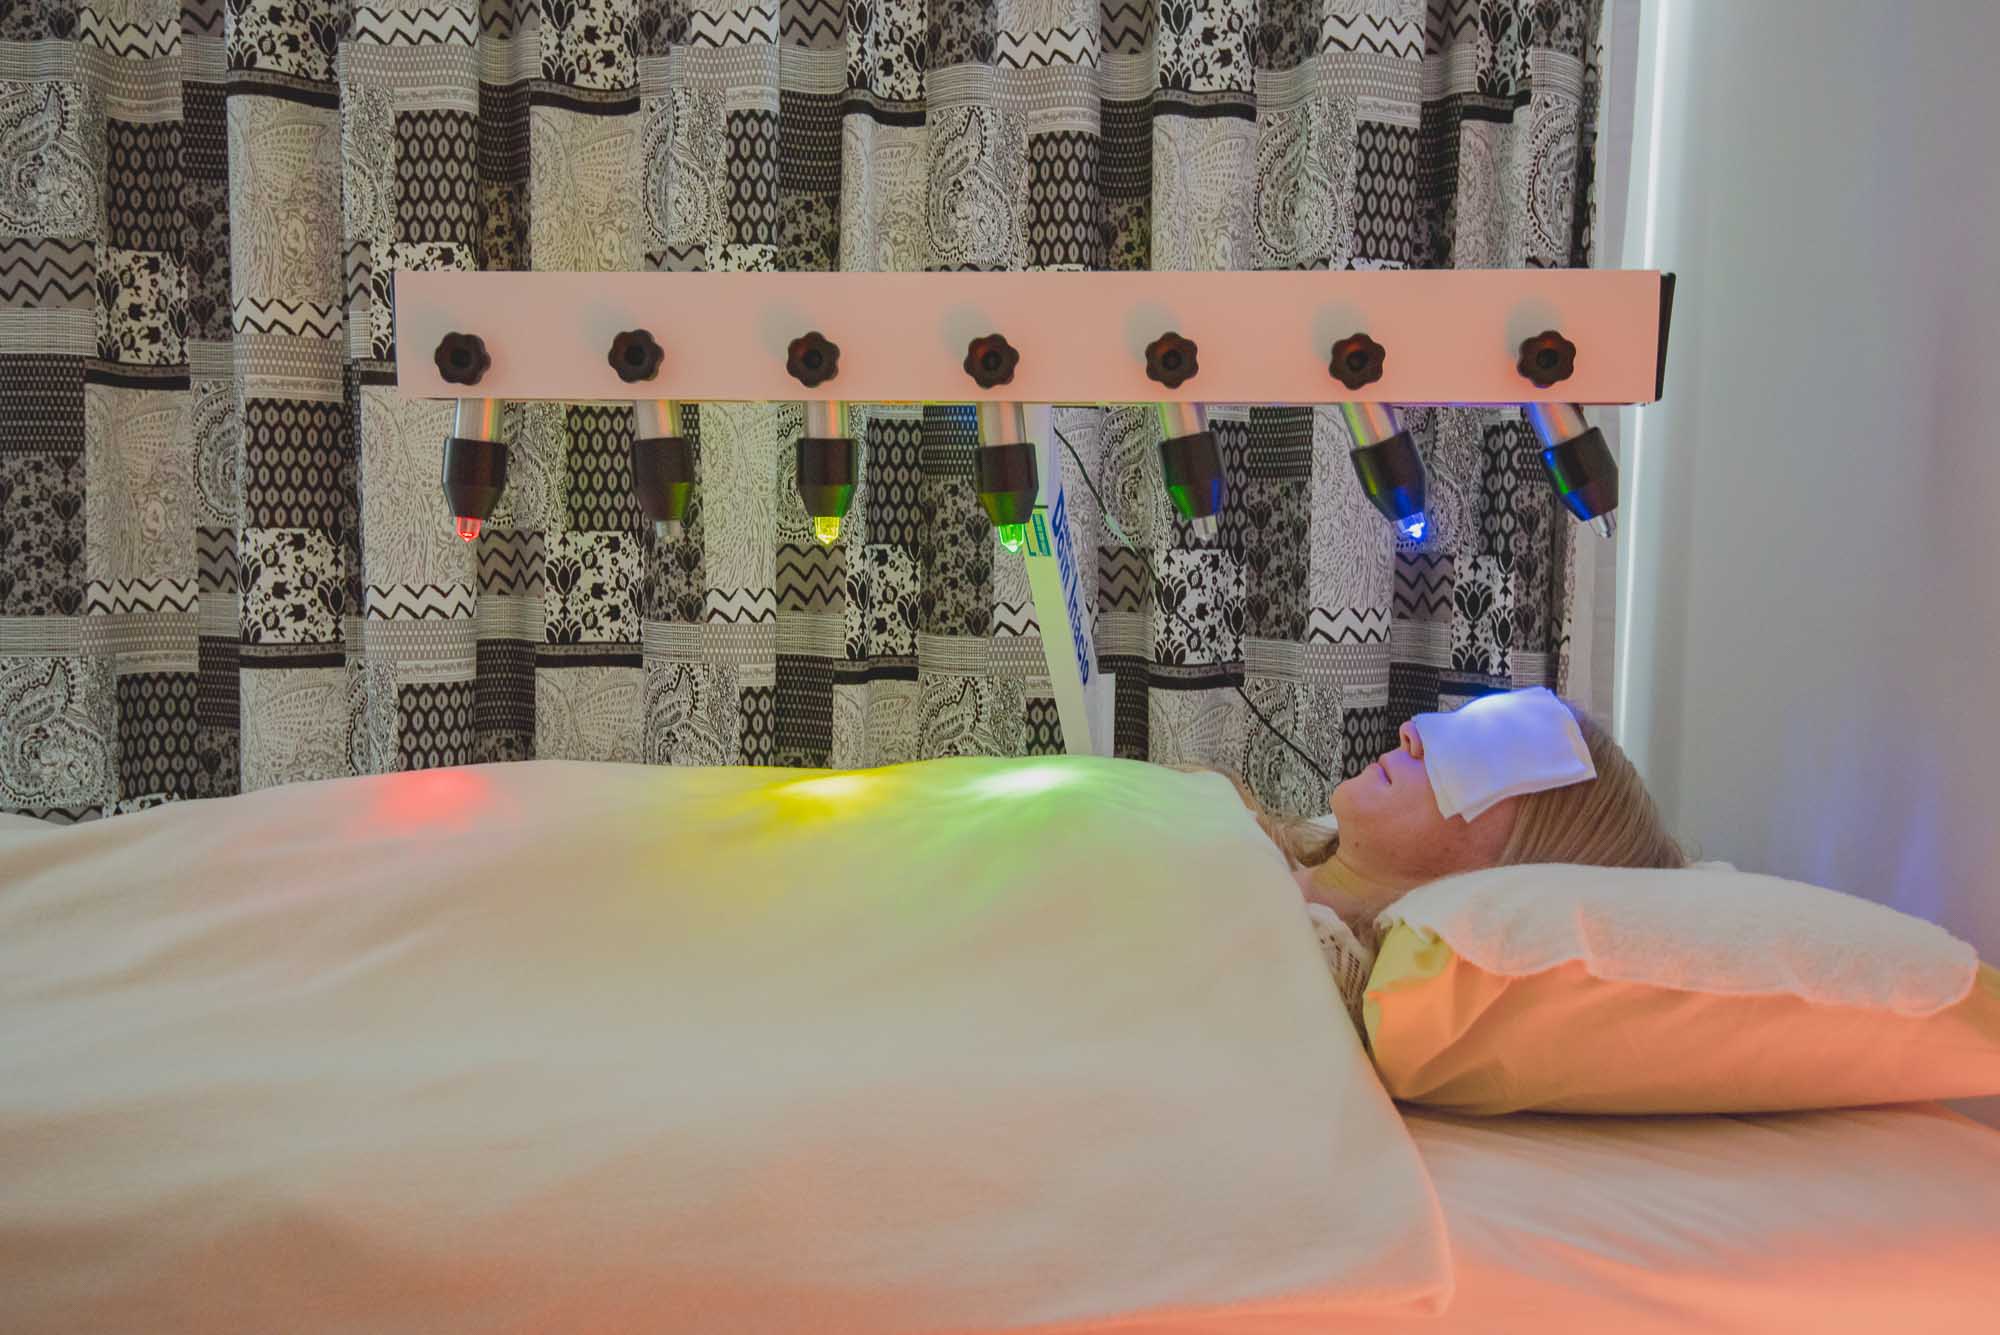 Natural Healing - Crustal Light Bed - Crystal Light Therapy